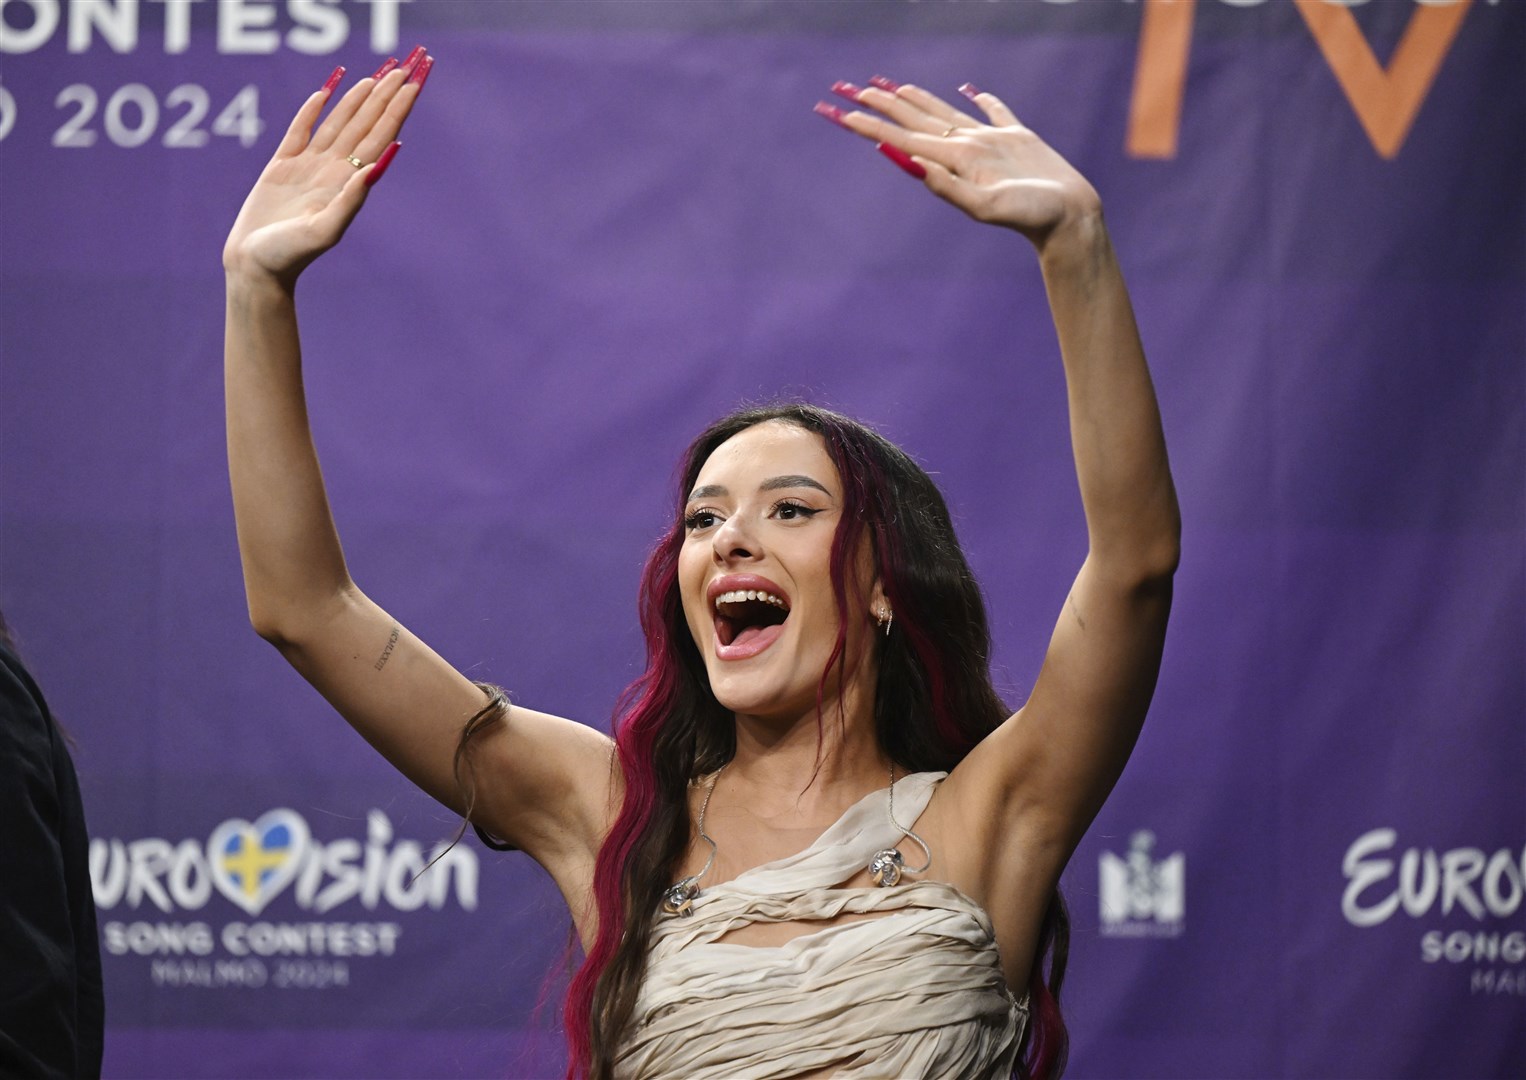 Eden Golan representing Israel waves during a press meeting with the entries that advanced to the final after the second semi-final of the Eurovision Song Contest (Jessica Gow/AP)